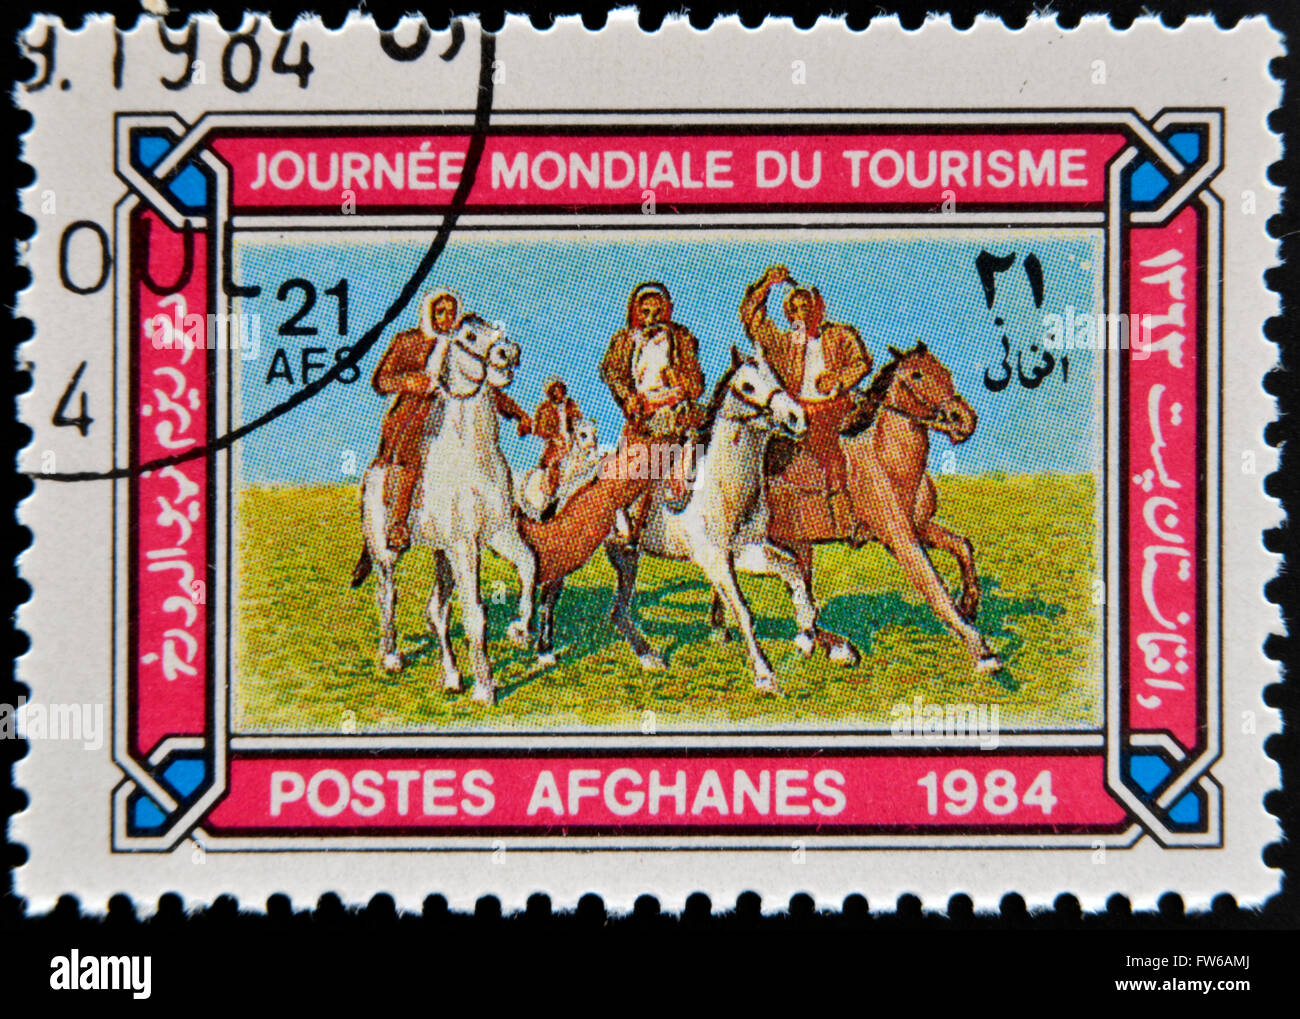 AFGHANISTAN - CIRCA 1984: A stamp printed in Afghanistan shows Horsemen playing Tourism buzkashi, circa 1984 Stock Photo